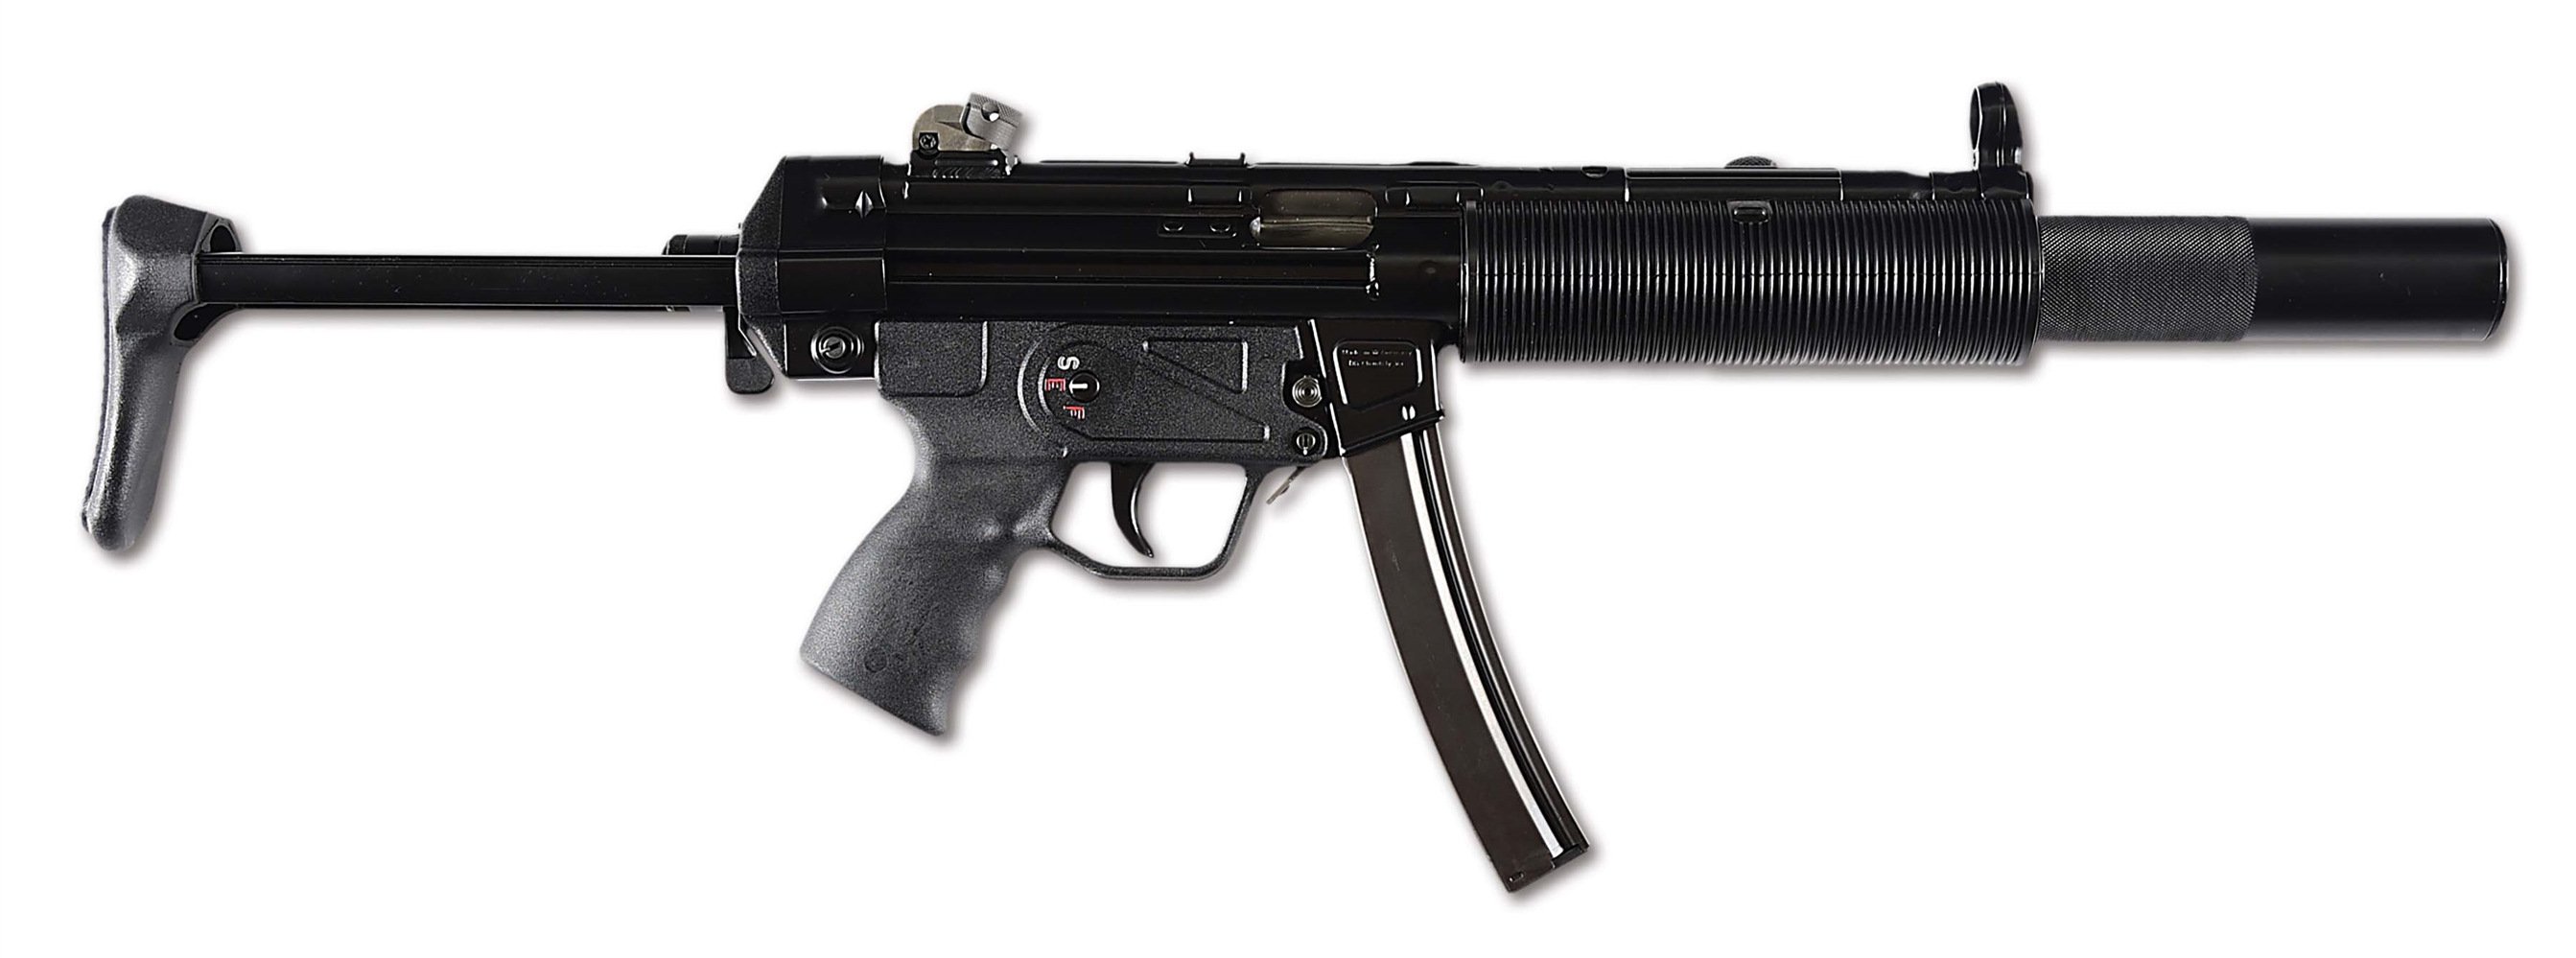 (N) VERY POPULAR QUALIFIED MANUFACTURING HECKLER & KOCH REGISTERED AUTO SEAR MACHINE GUN IN HK MP5SD MARKED HOST GUN WITH RDTS SILENCER (FULLY TRANSFERABLE).